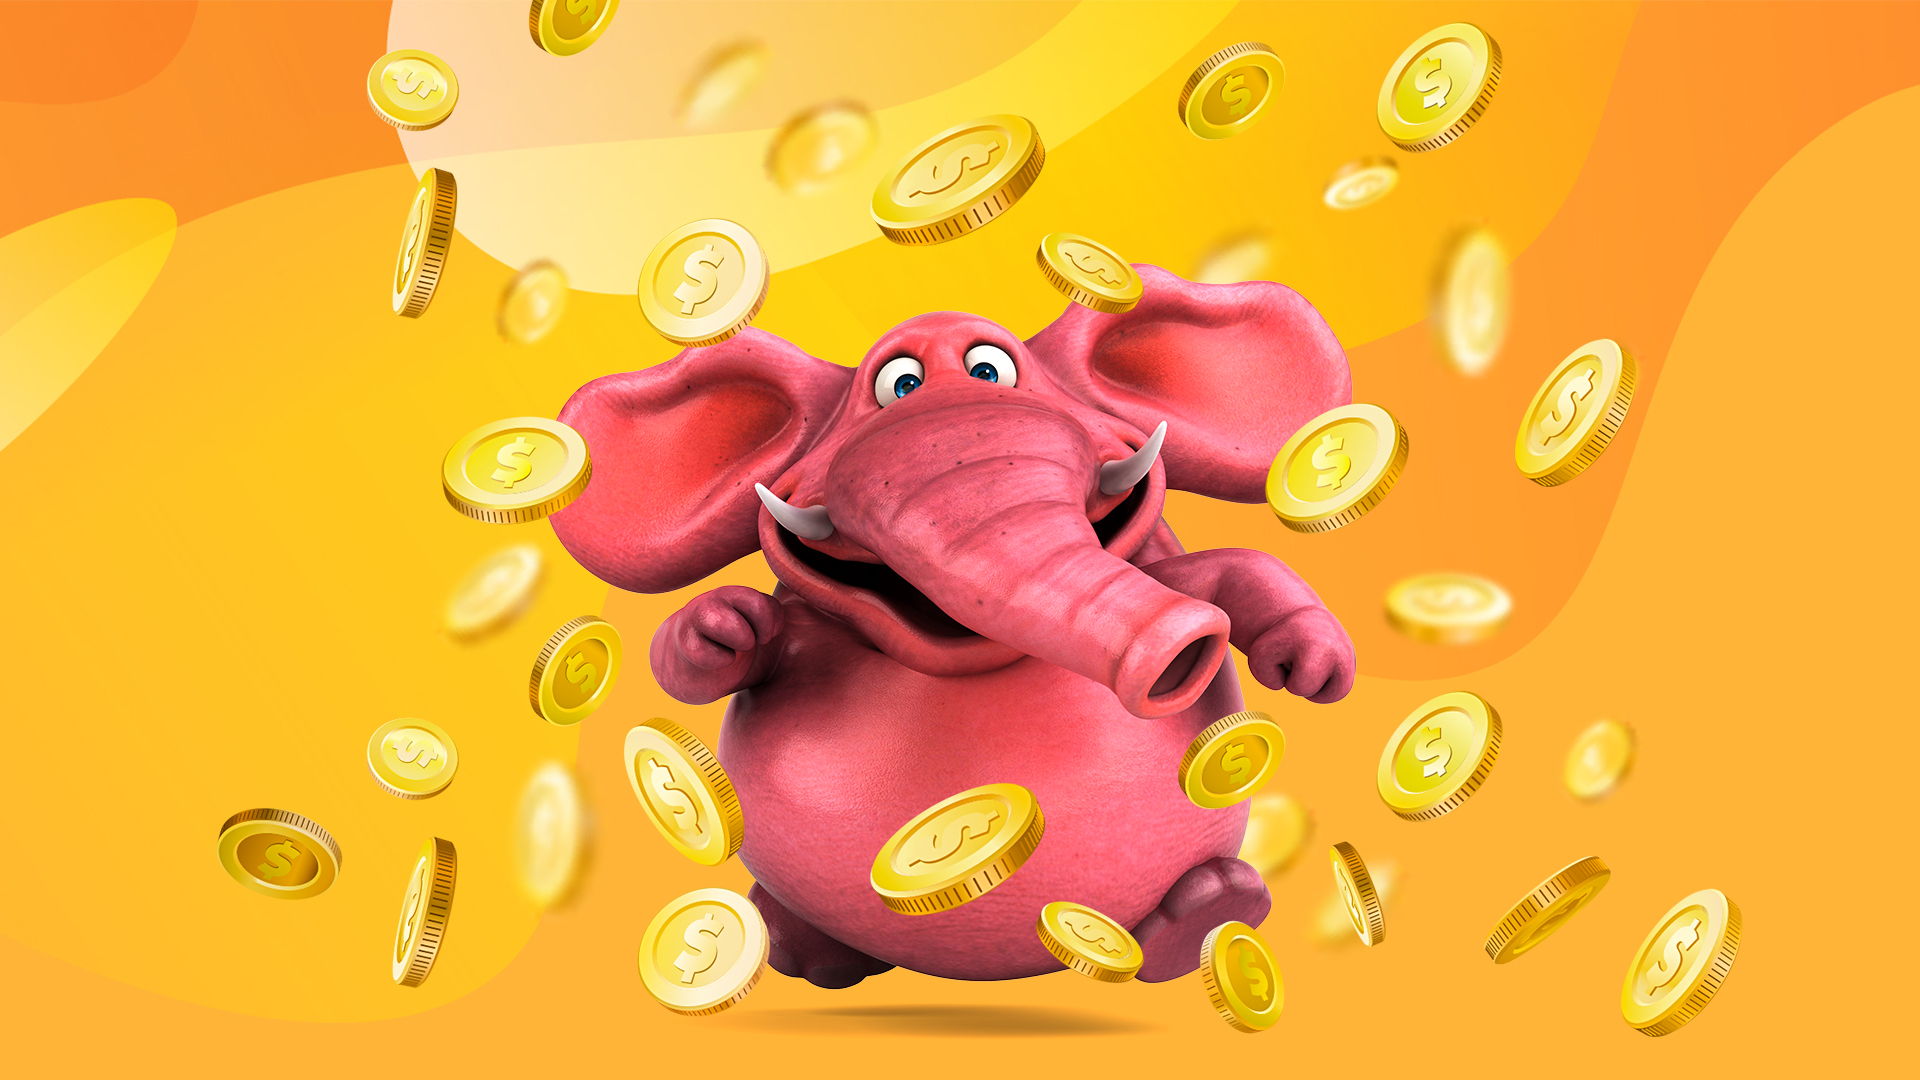 A 3D-animated pink elephant is seen jumping in the middle of the image with an excited expression, surrounded by oversized floating gold coins against a tri-tone orange background.